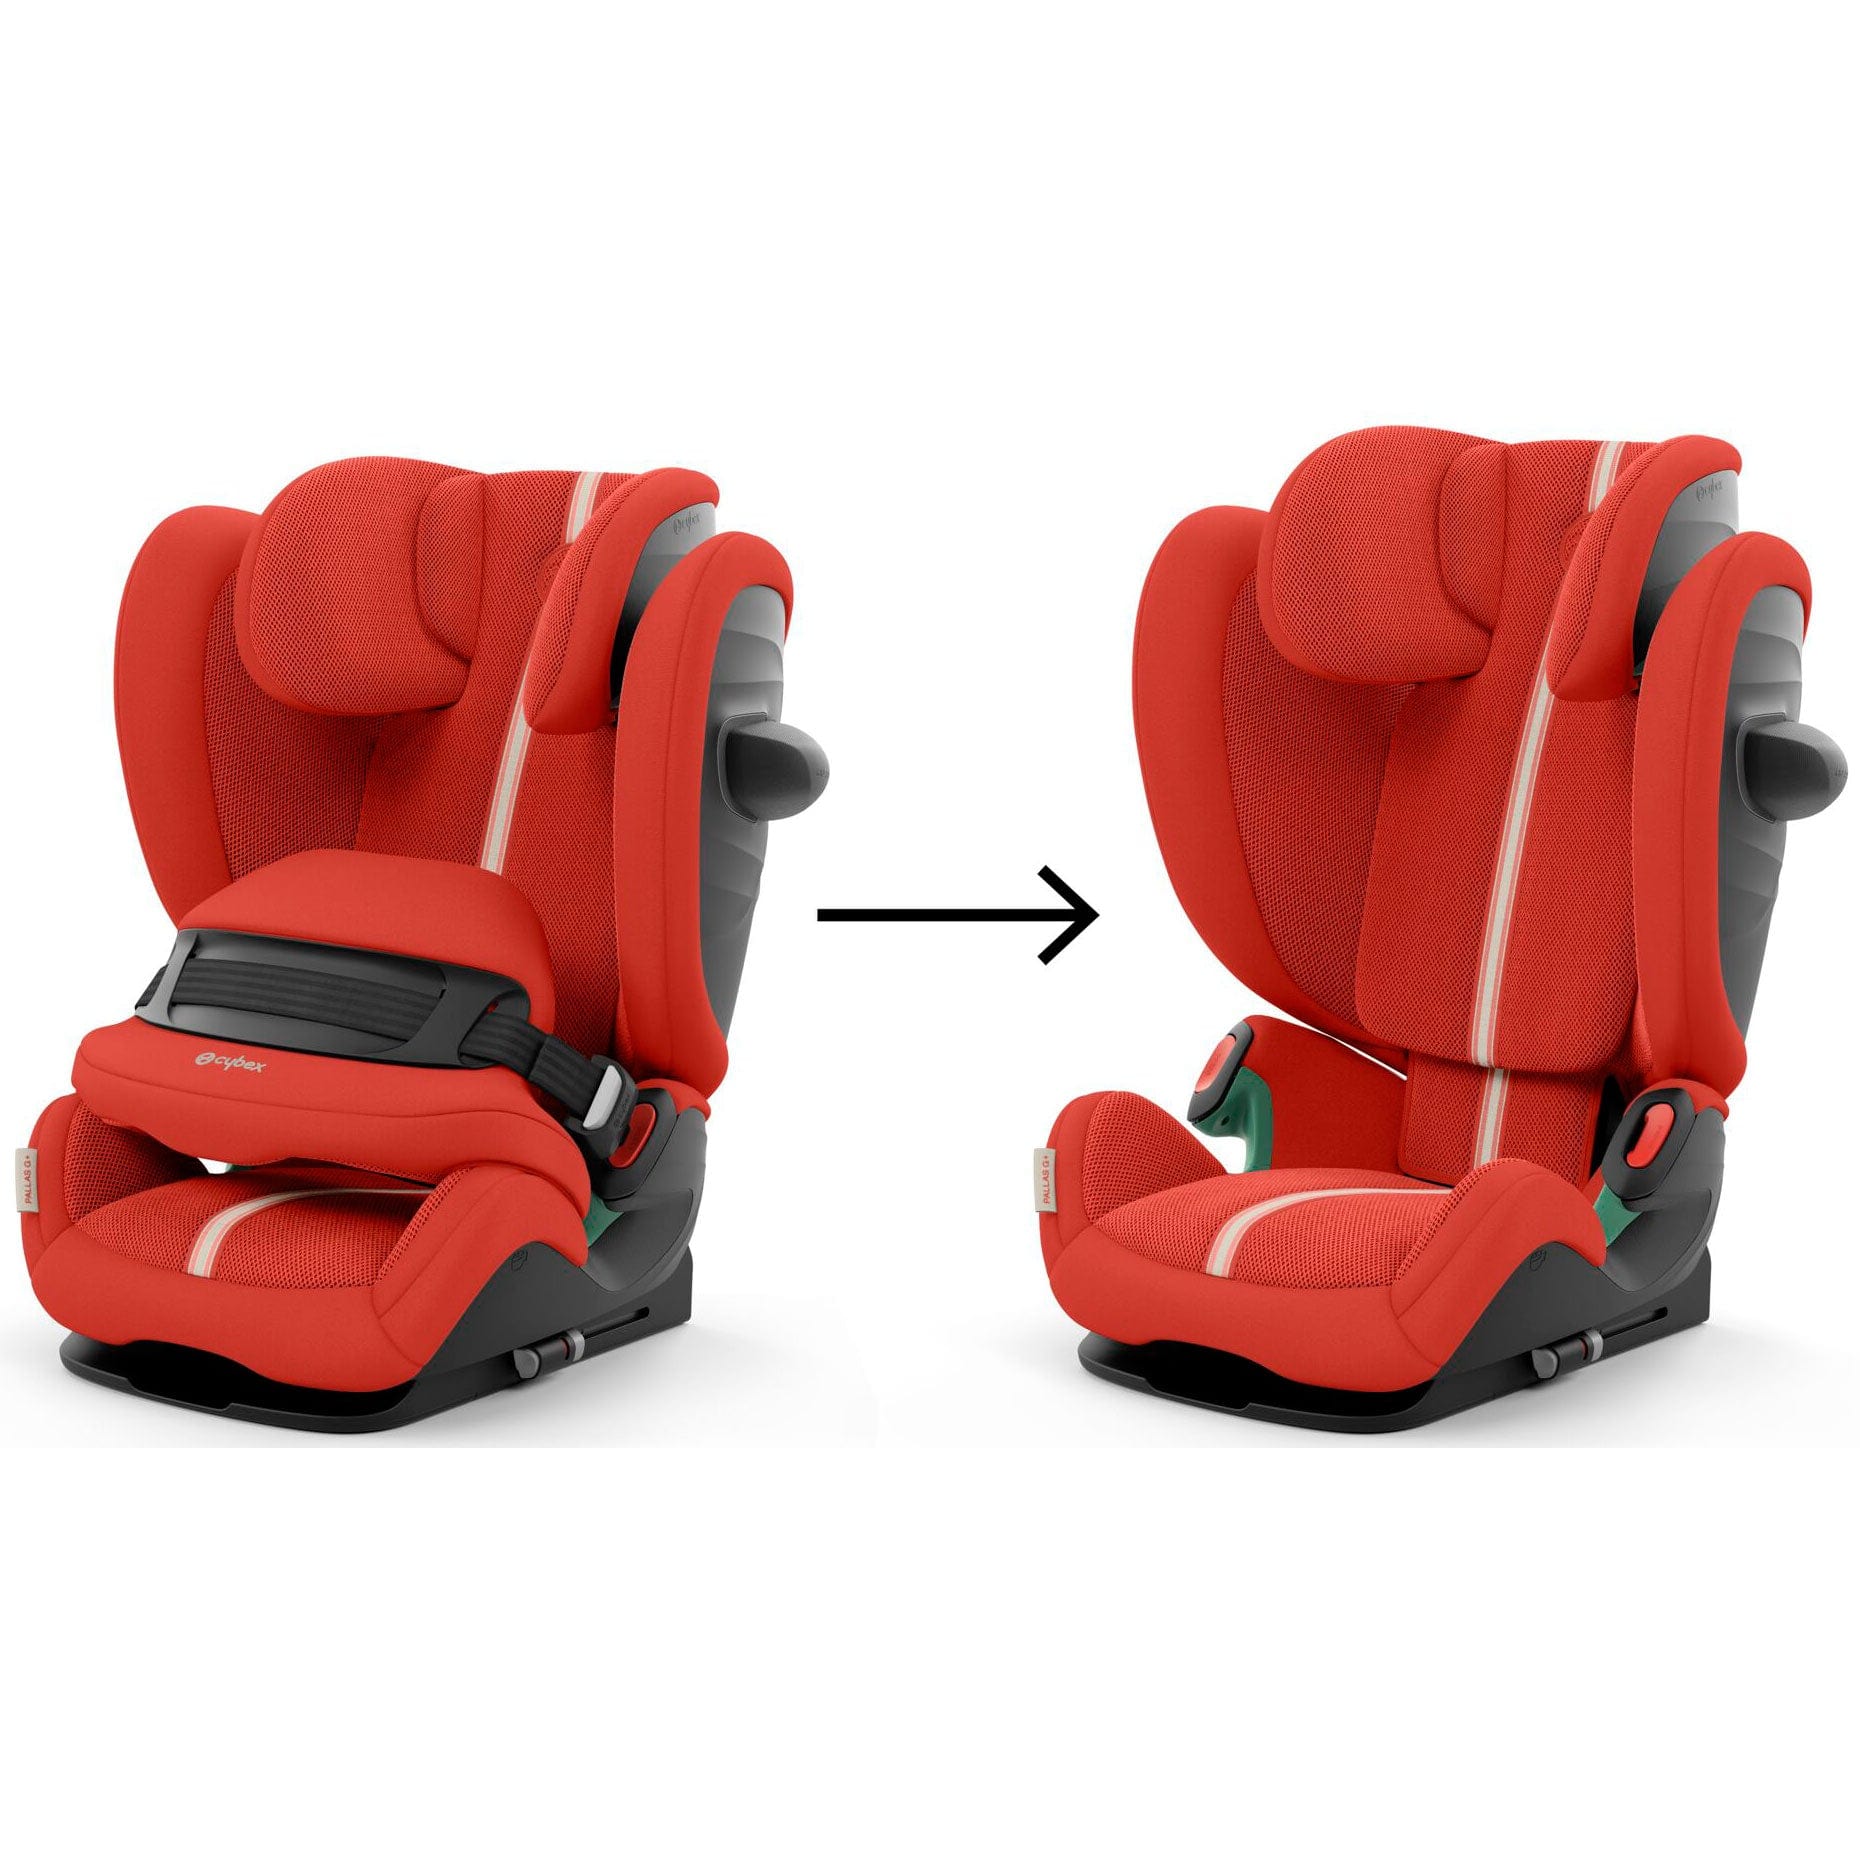 Cybex combination car seats Cybex Pallas G i-Size Plus Car Seat - Hibiscus Red 523001097